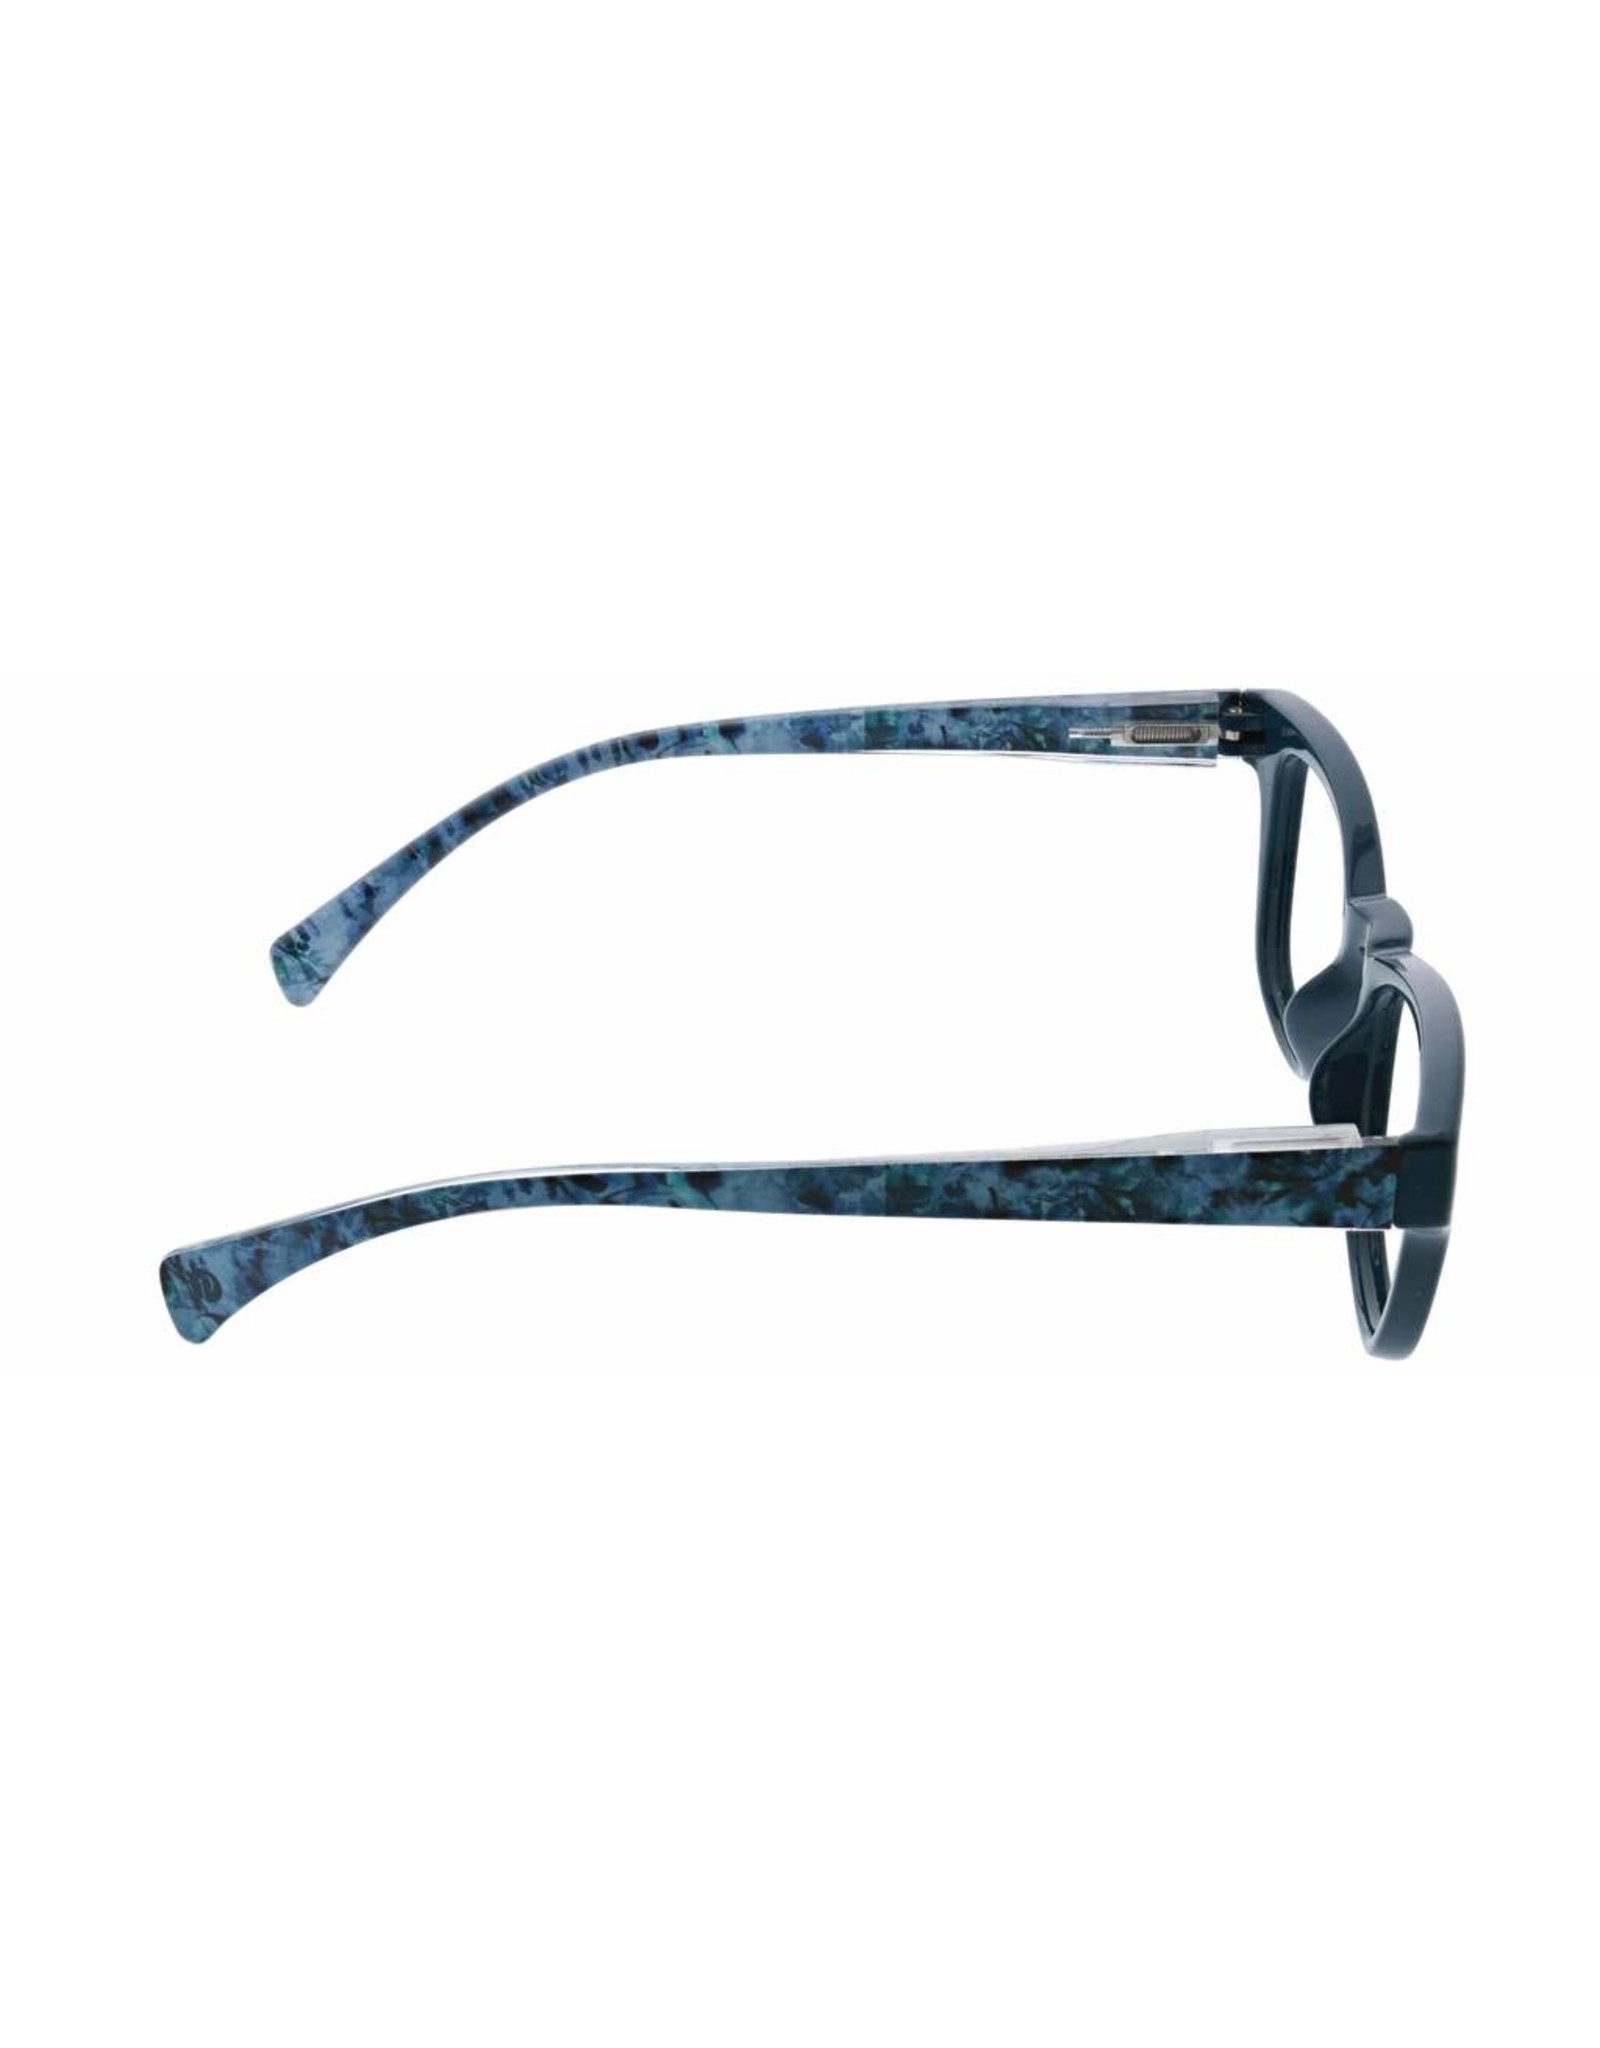 Reading Glasses Sparrow Teal Fauna +1.50